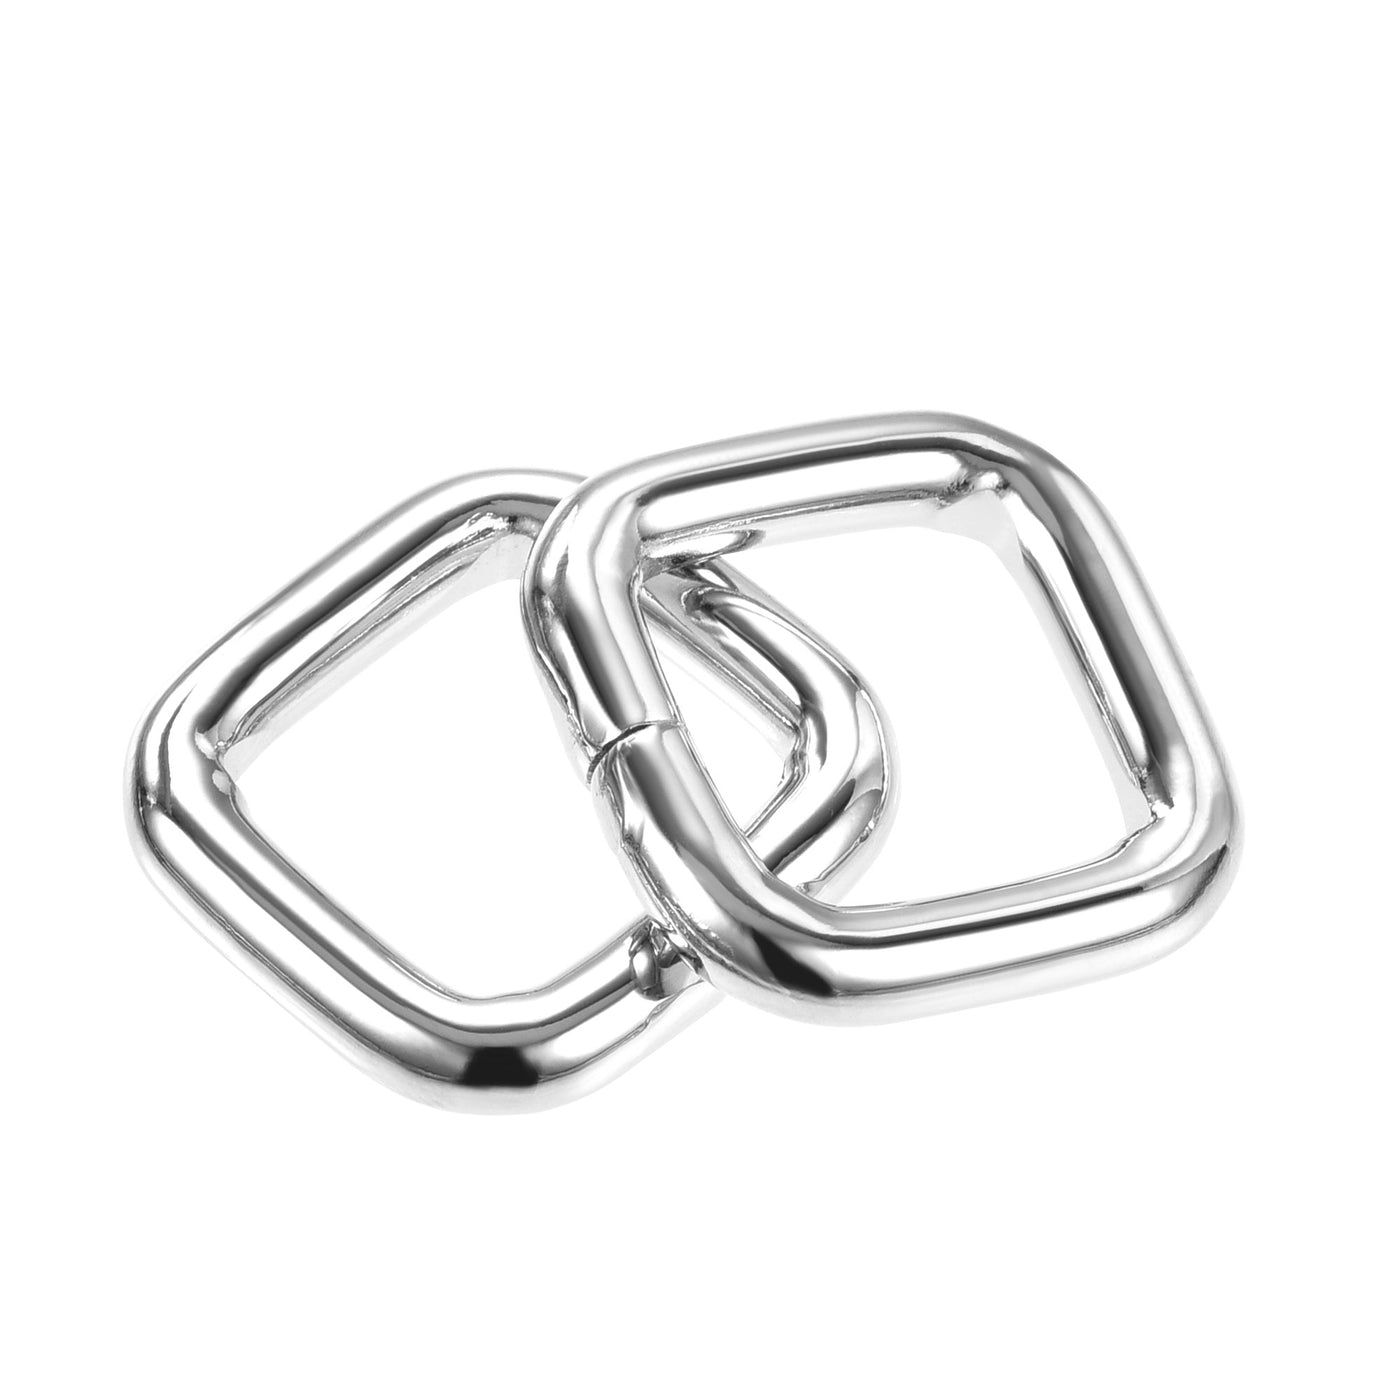 uxcell Uxcell Metal Rectangle Ring Buckles 17x16mm for Bags Belts DIY Silver Tone 30pcs